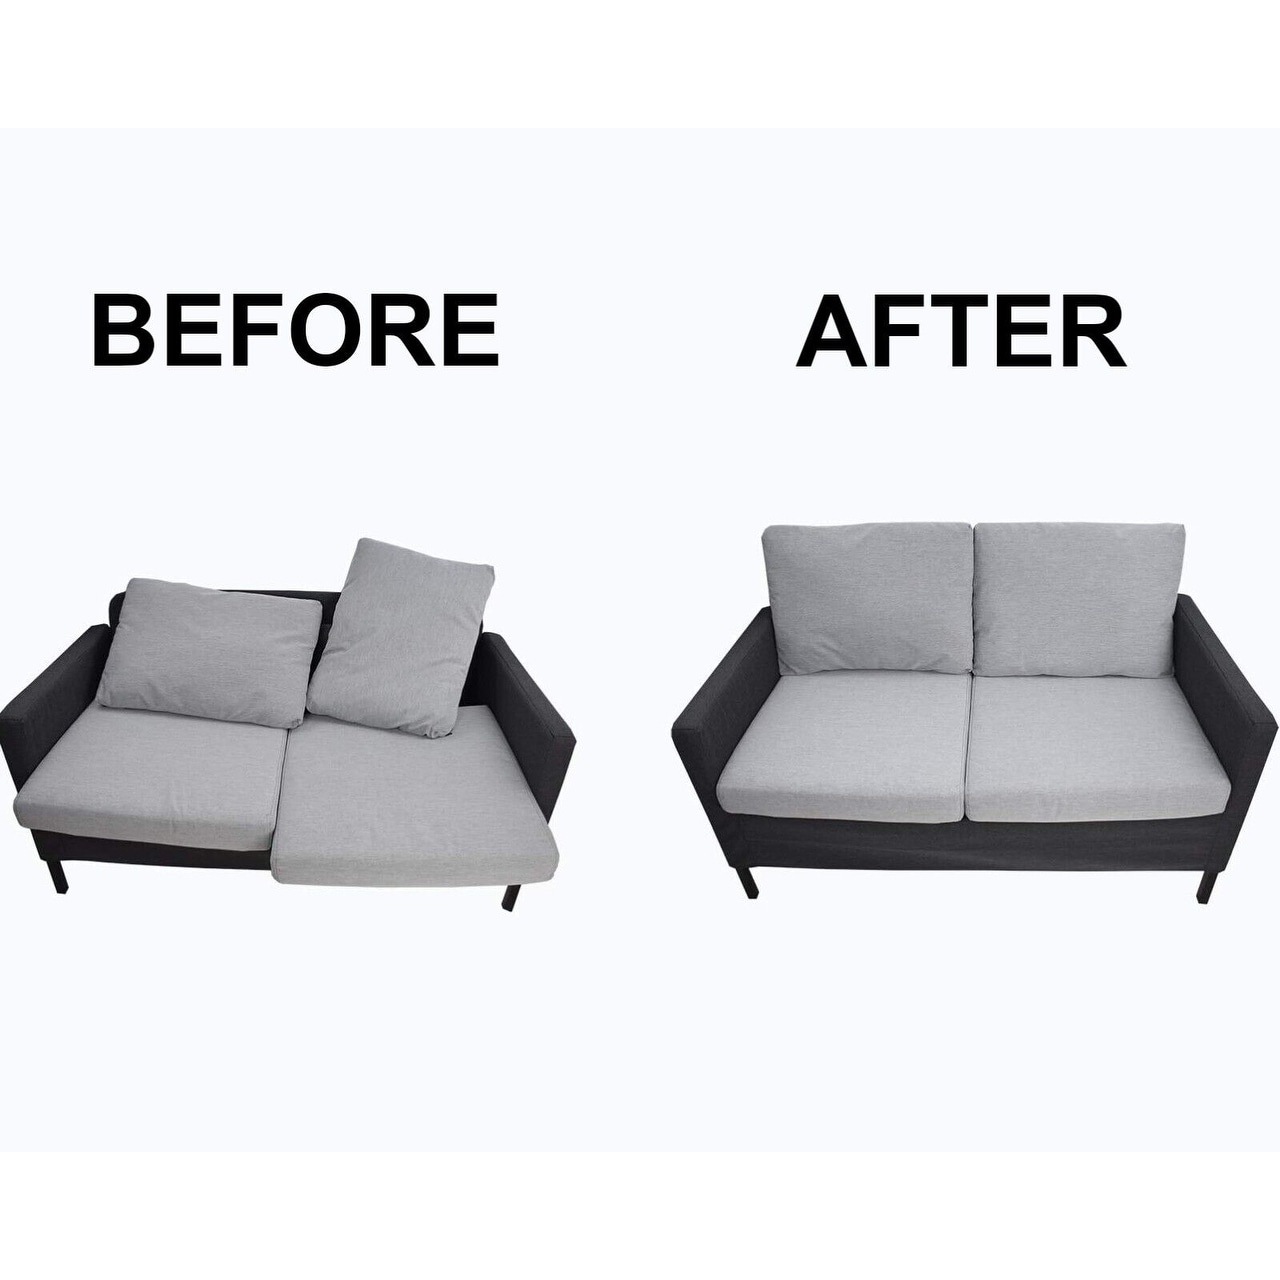 https://ak1.ostkcdn.com/images/products/is/images/direct/f974546ba9337e77f026545bbe667857a9034803/Sofa-Couch-Grip-Pad-Stops-Cushions-from-Sliding---Couch-Anti-Slip-Pads.jpg